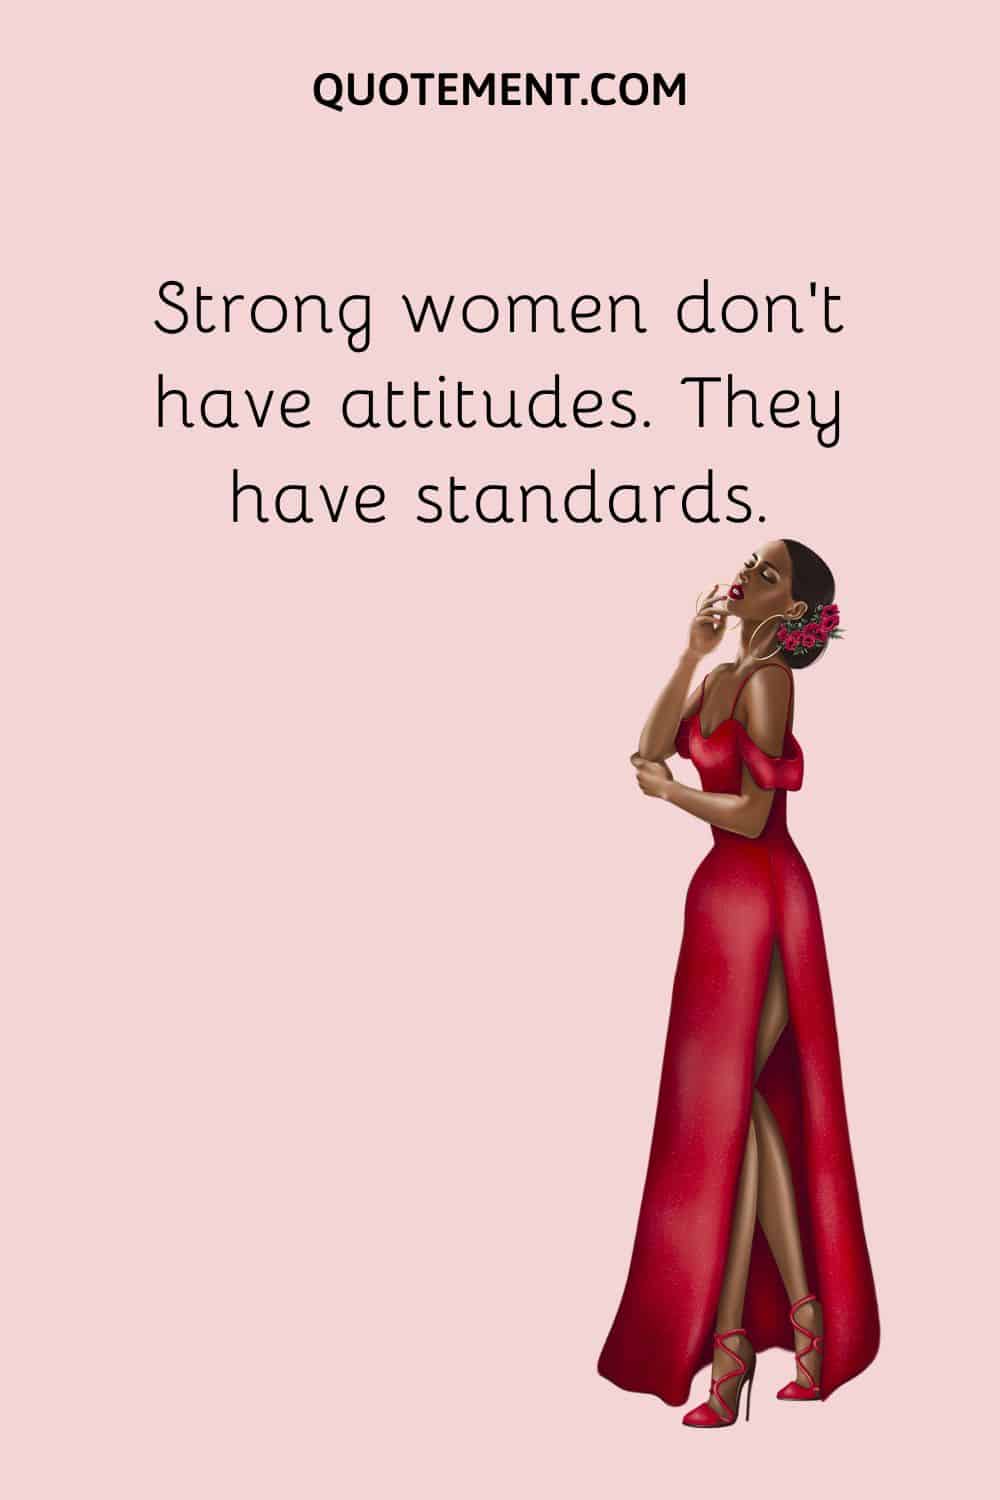 Strong women don’t have attitudes